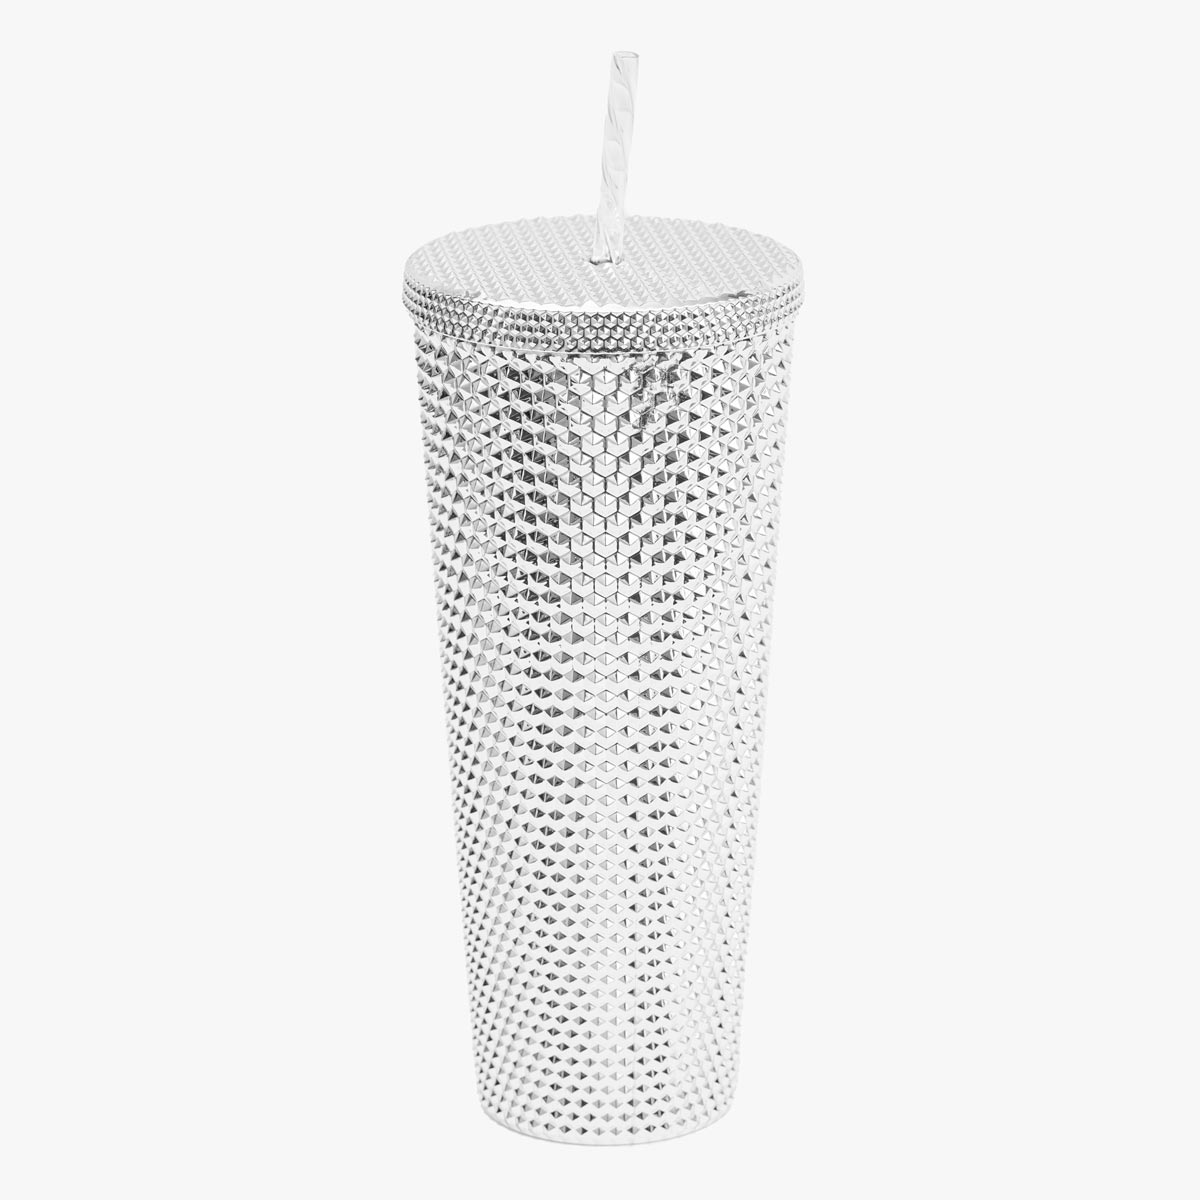 Metallic Silver Textured Tumbler with Straw by Hard Rock image number 2